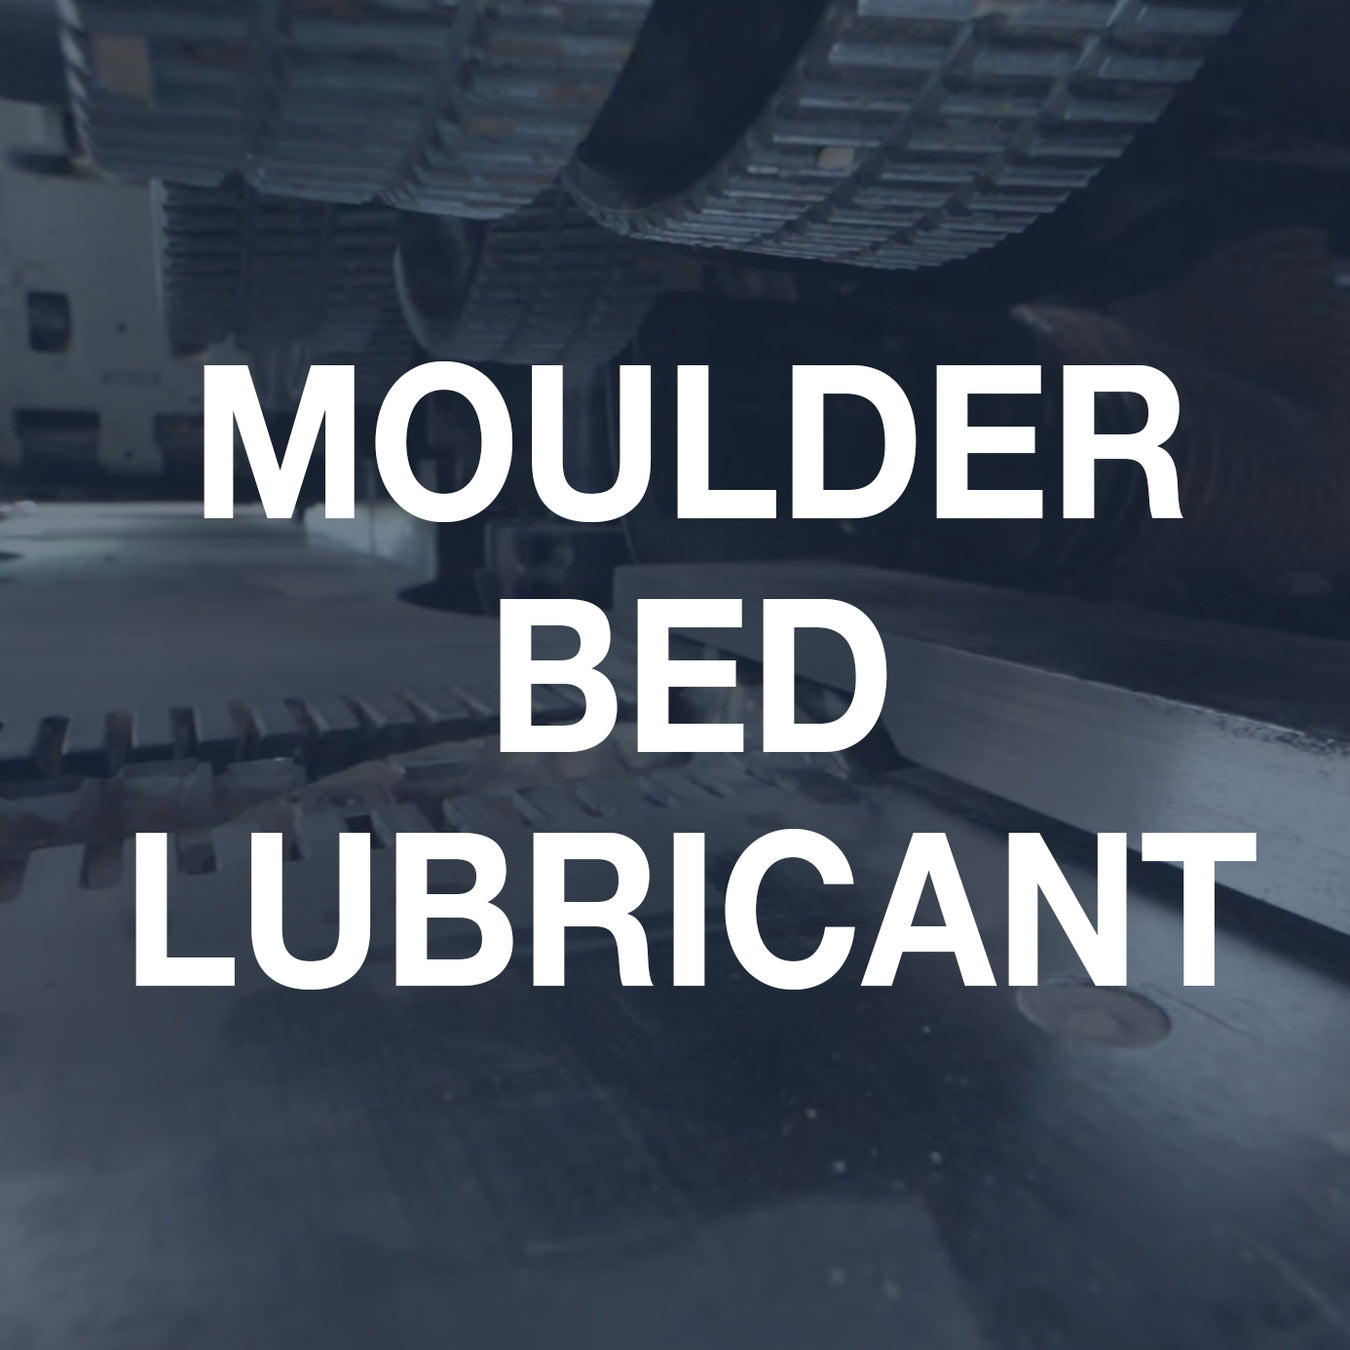 Biolube Moulder Bed Lubricant collection sold at Smith Sawmill Service